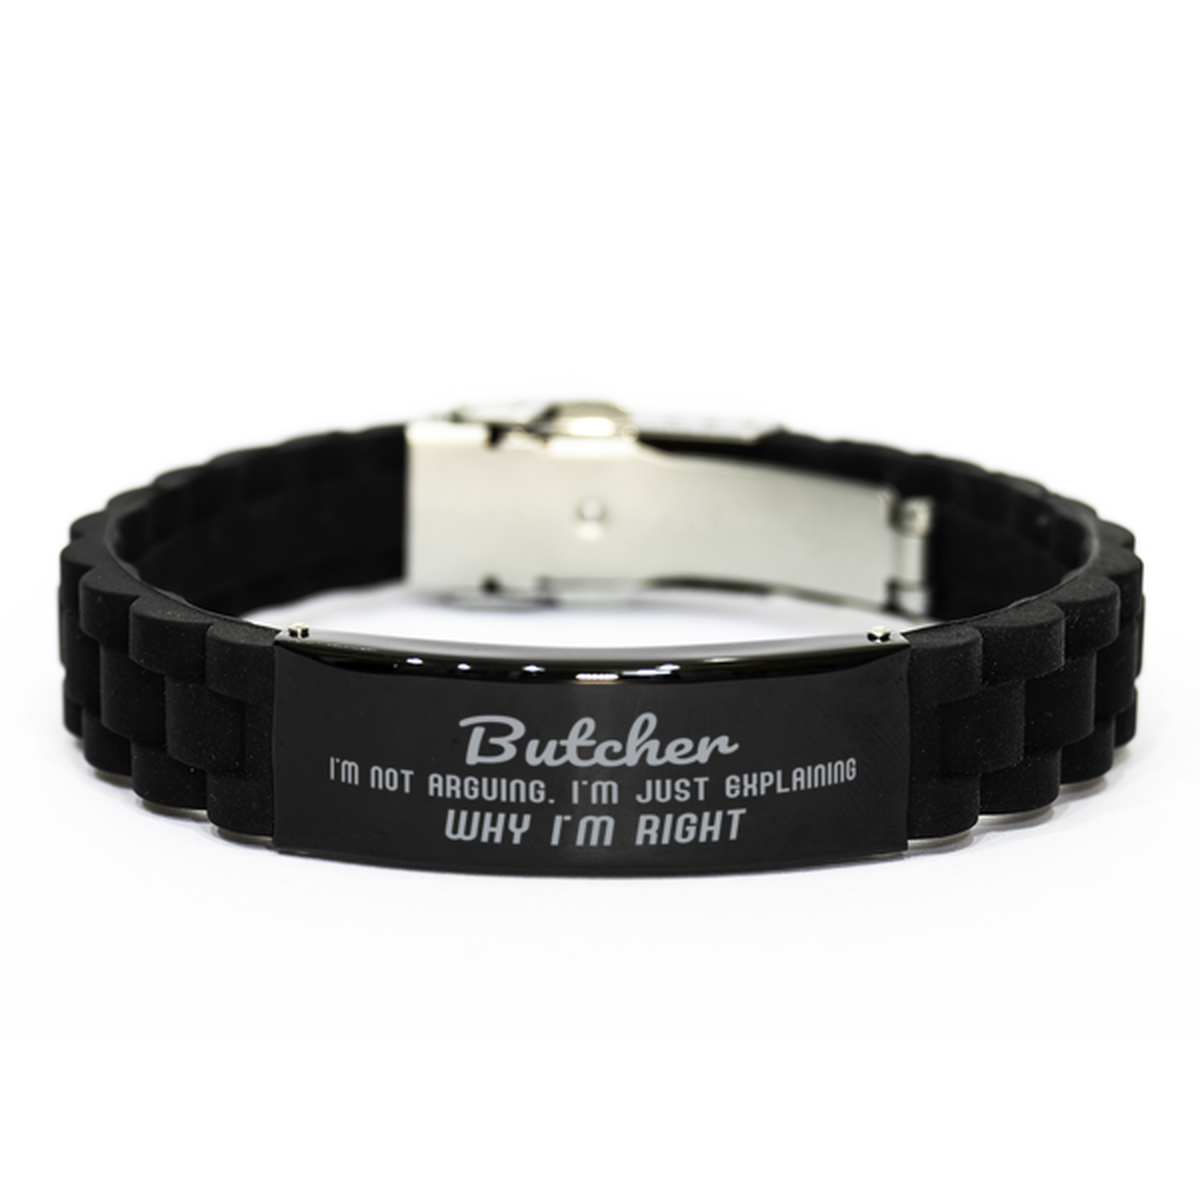 Butcher I'm not Arguing. I'm Just Explaining Why I'm RIGHT Black Glidelock Clasp Bracelet, Funny Saying Quote Butcher Gifts For Butcher Graduation Birthday Christmas Gifts for Men Women Coworker